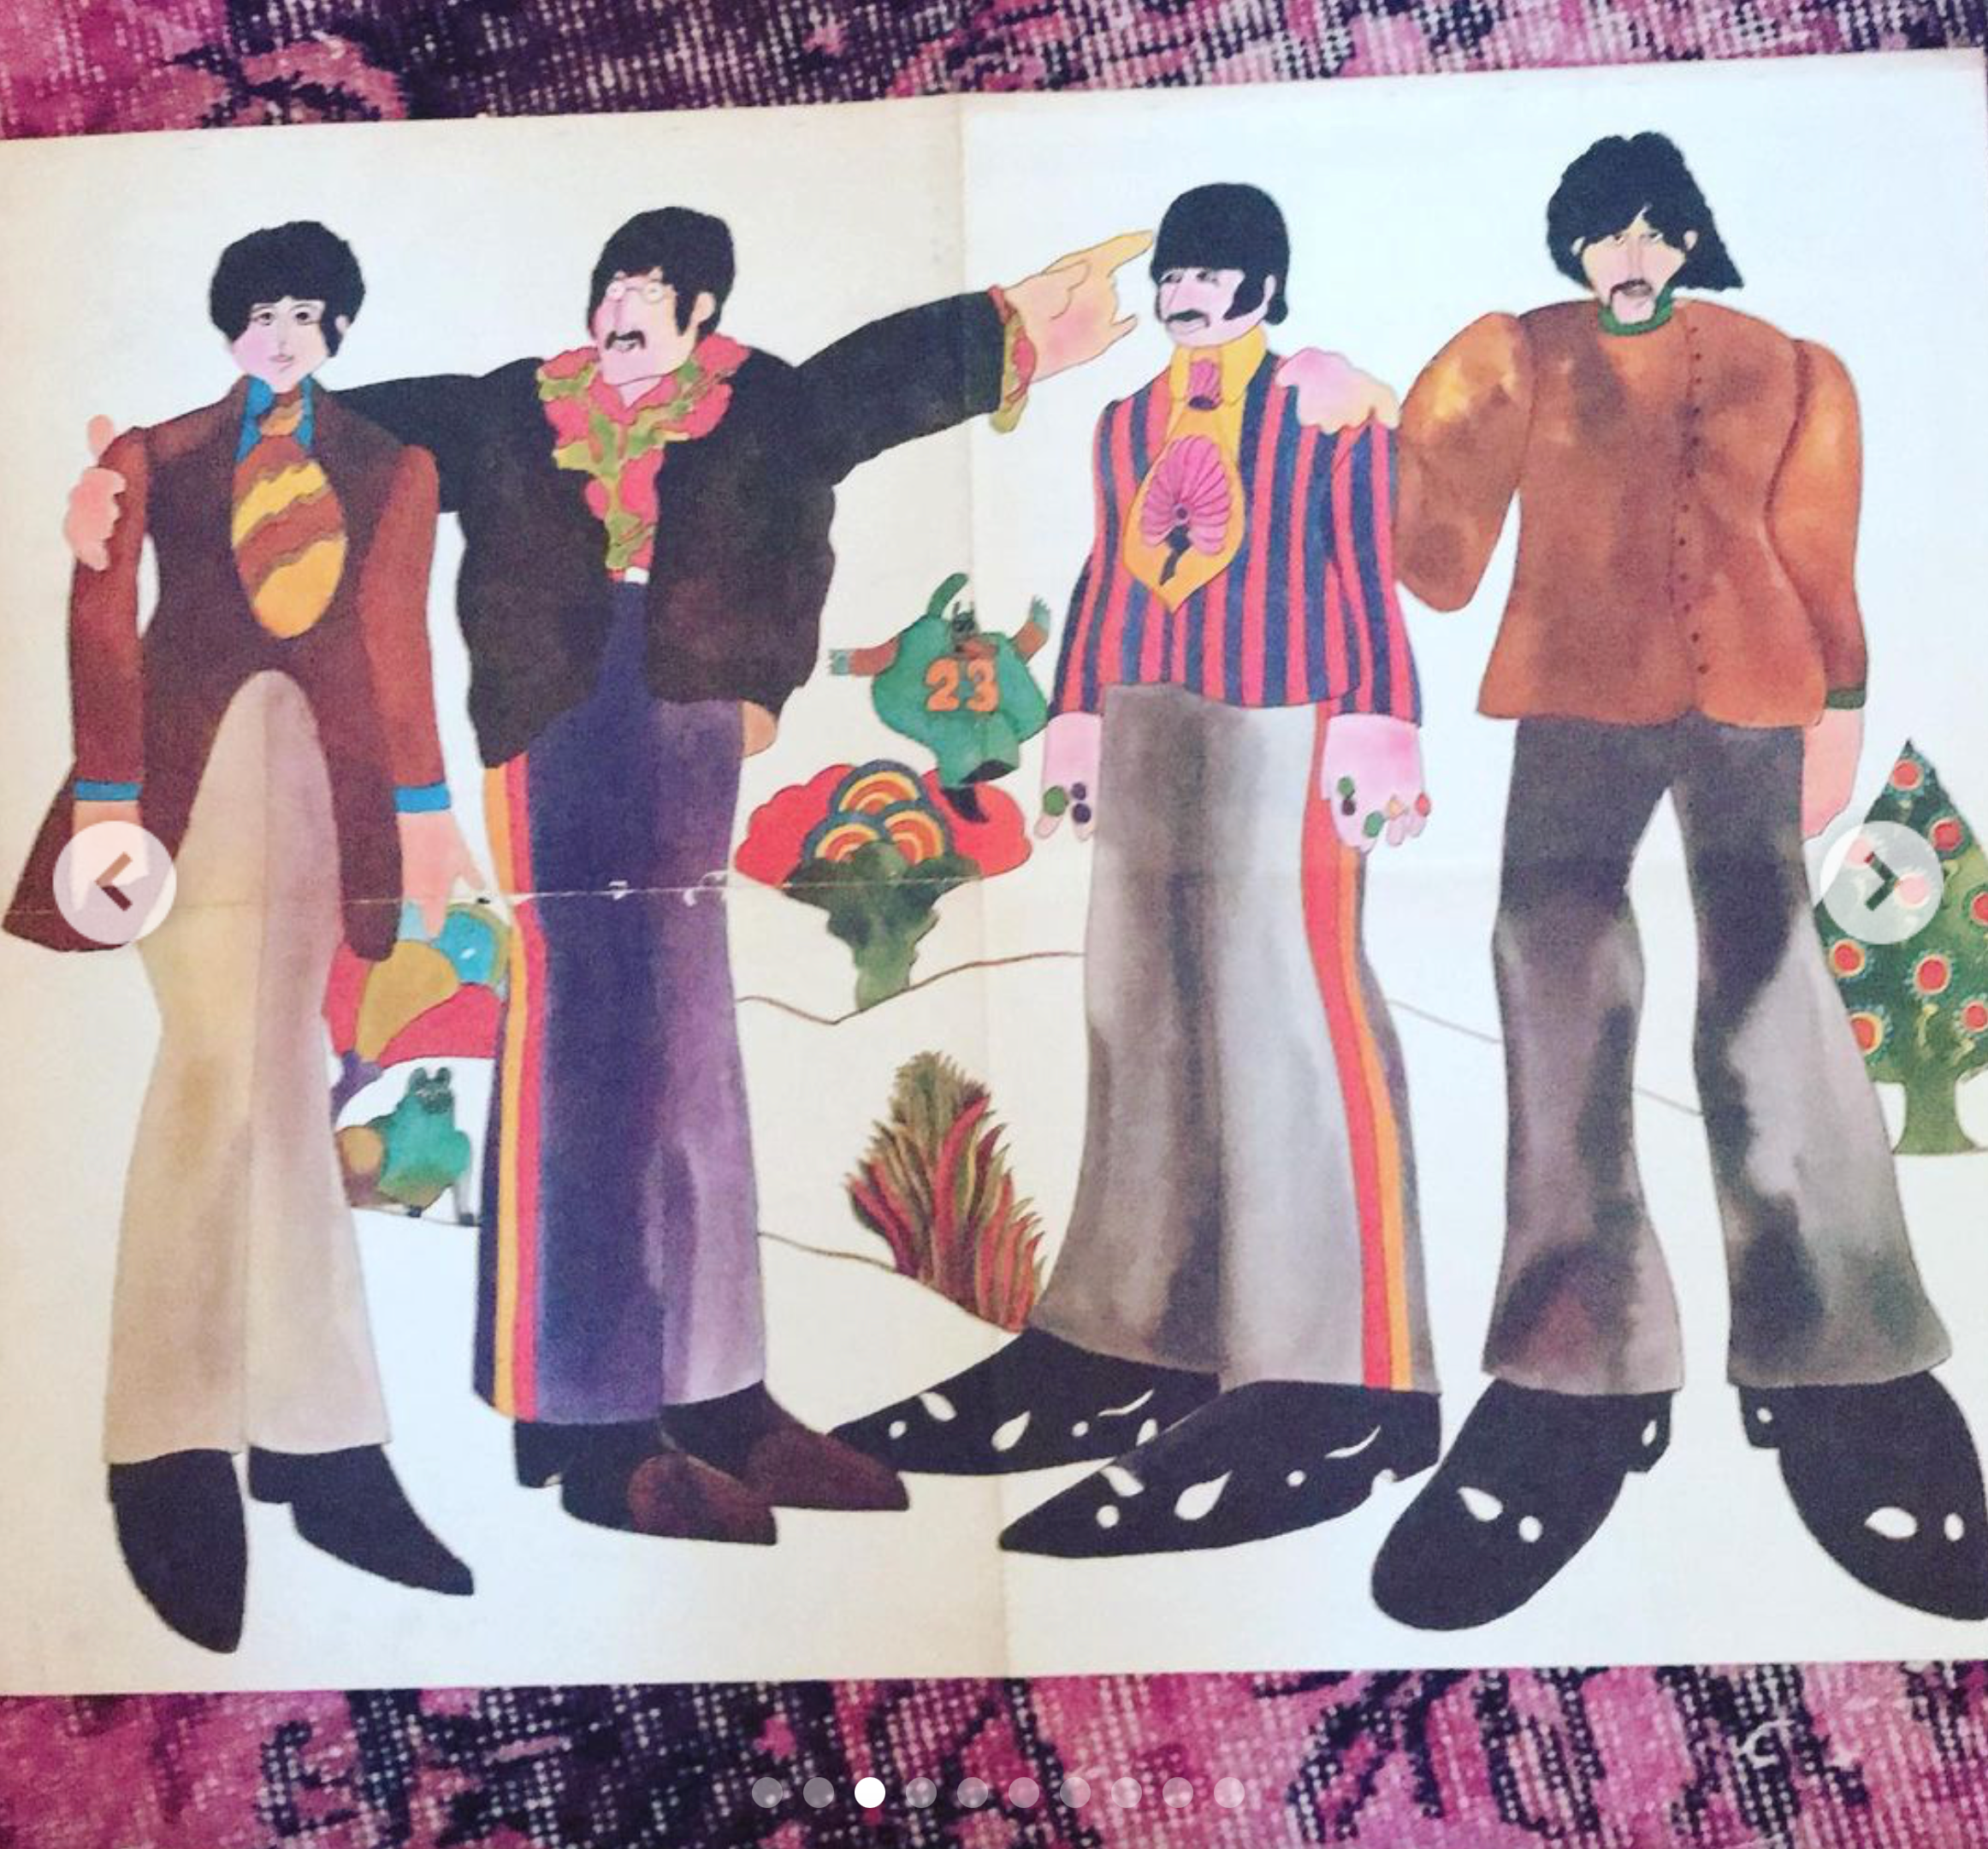 Groovy "EYE Magazine"  INSERT POSTER  The Beatles   August 1968  Original, Official  Yellow Submarine Licensed Product